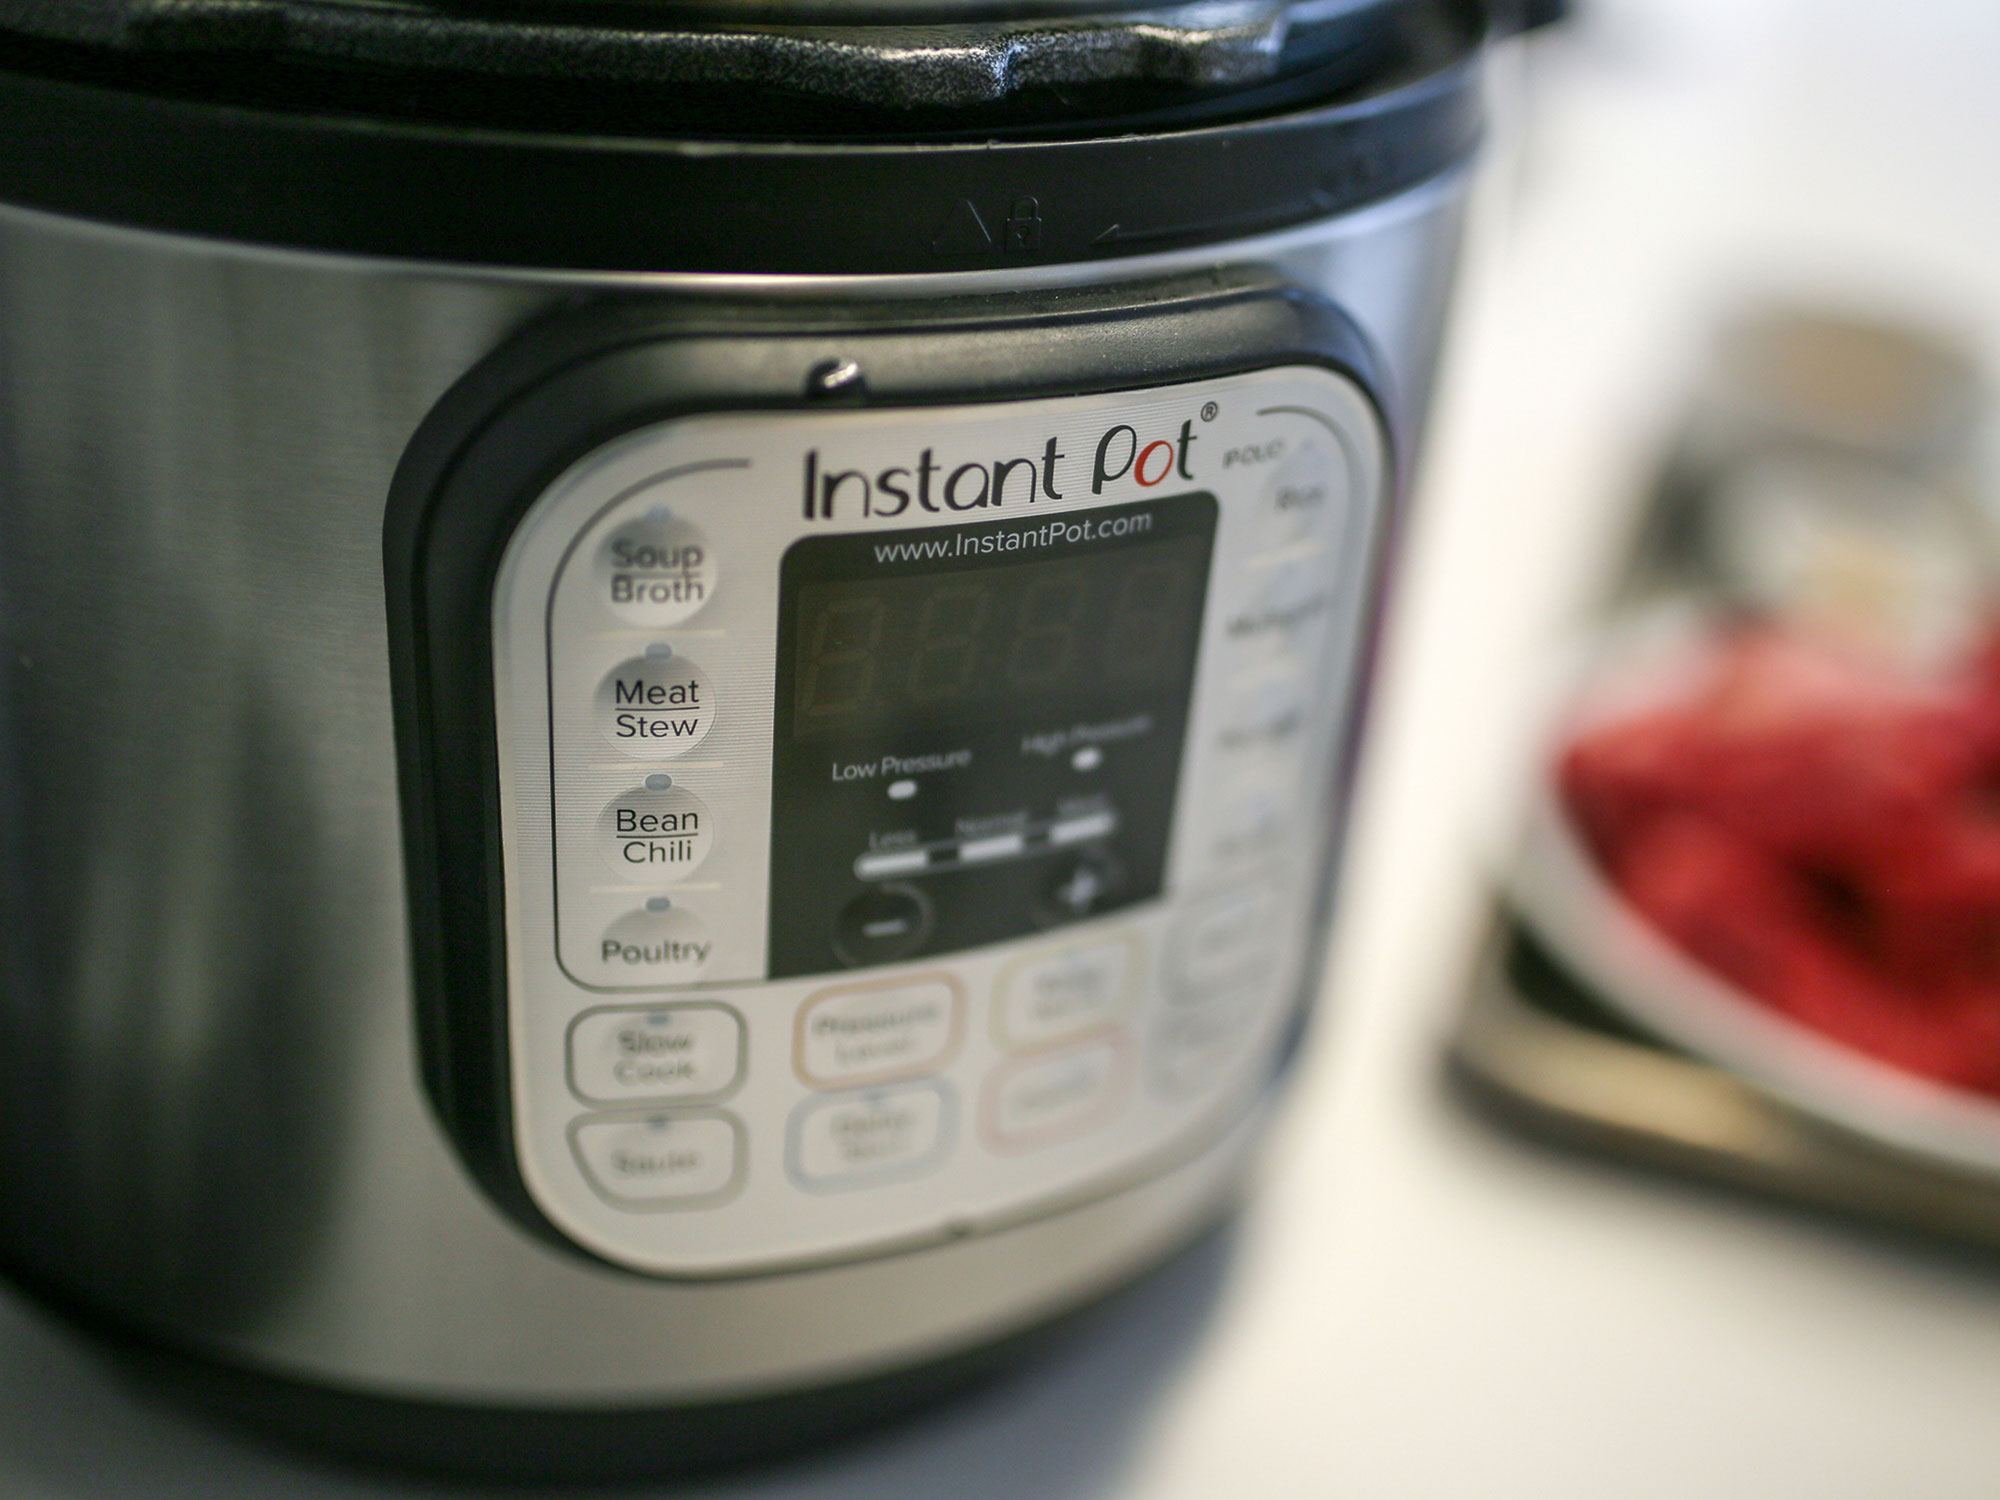 Why You Should NOT Use Your Instant Pot as a Slow Cooker